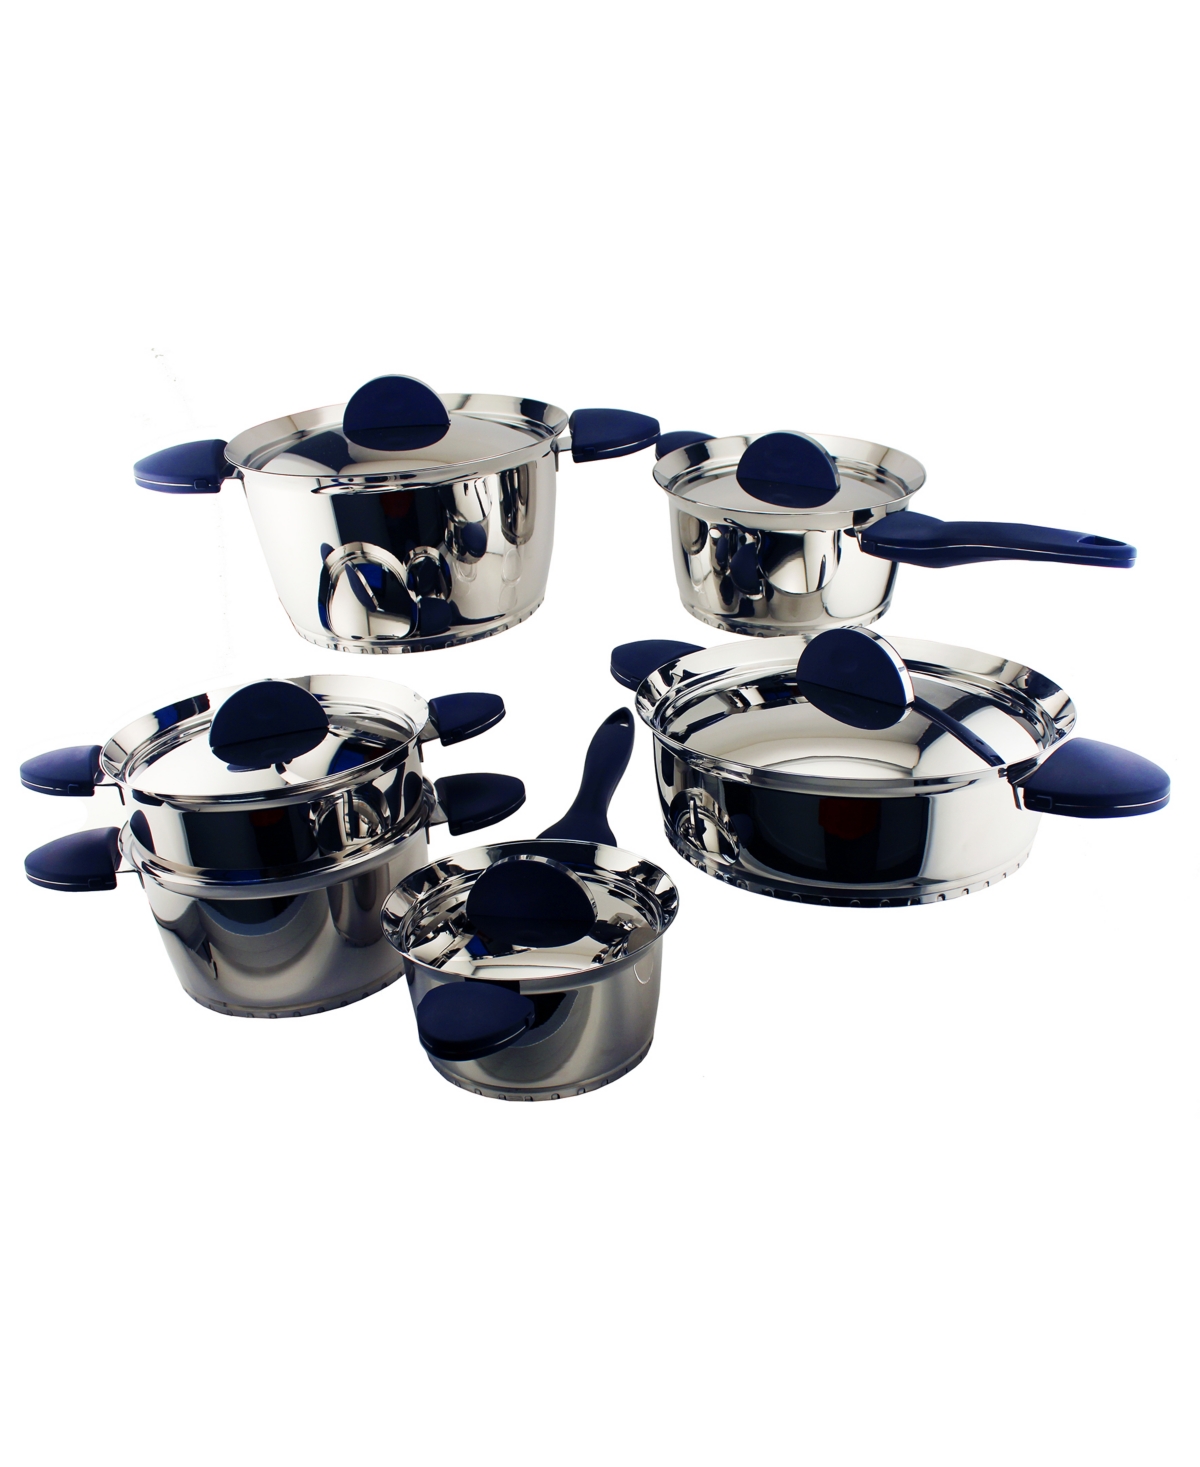 Stacca Stainless Steel 11 Piece Cookware Set